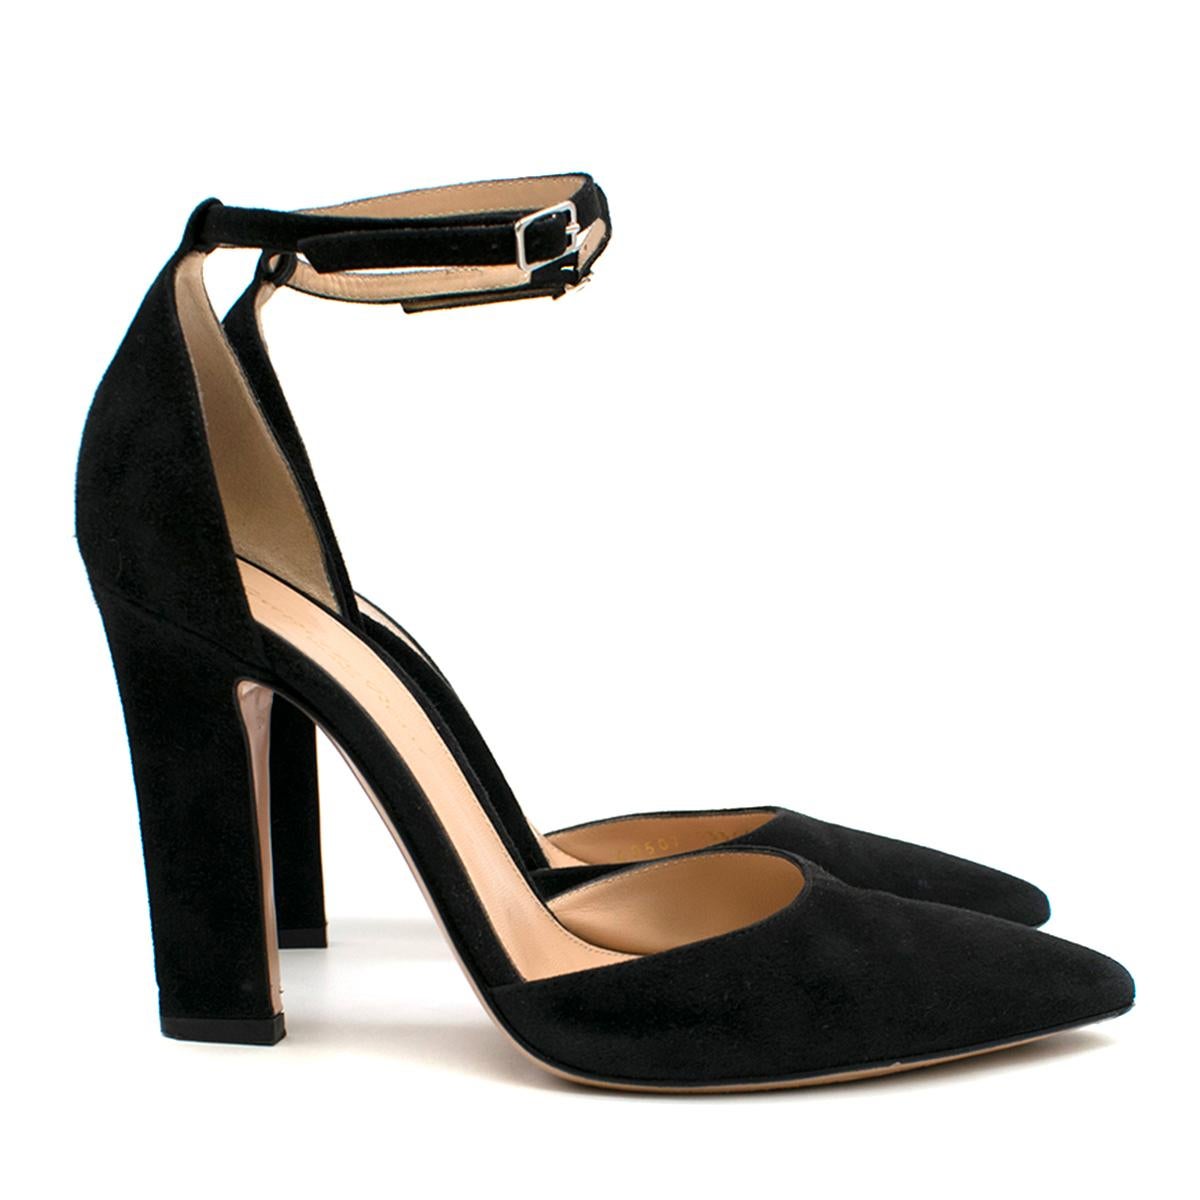 Gianvito Rossi Mila Suede Ankle Strap Pumps- As Worn By Kate Middleton

- Black Suede D'Orsay Pumps
- Heel approx 105mm/ 4 inches
- Point toe 
- Narrow block heel 
- Buckle-fastening ankle strap
- Made in Italy

Please note, these items are